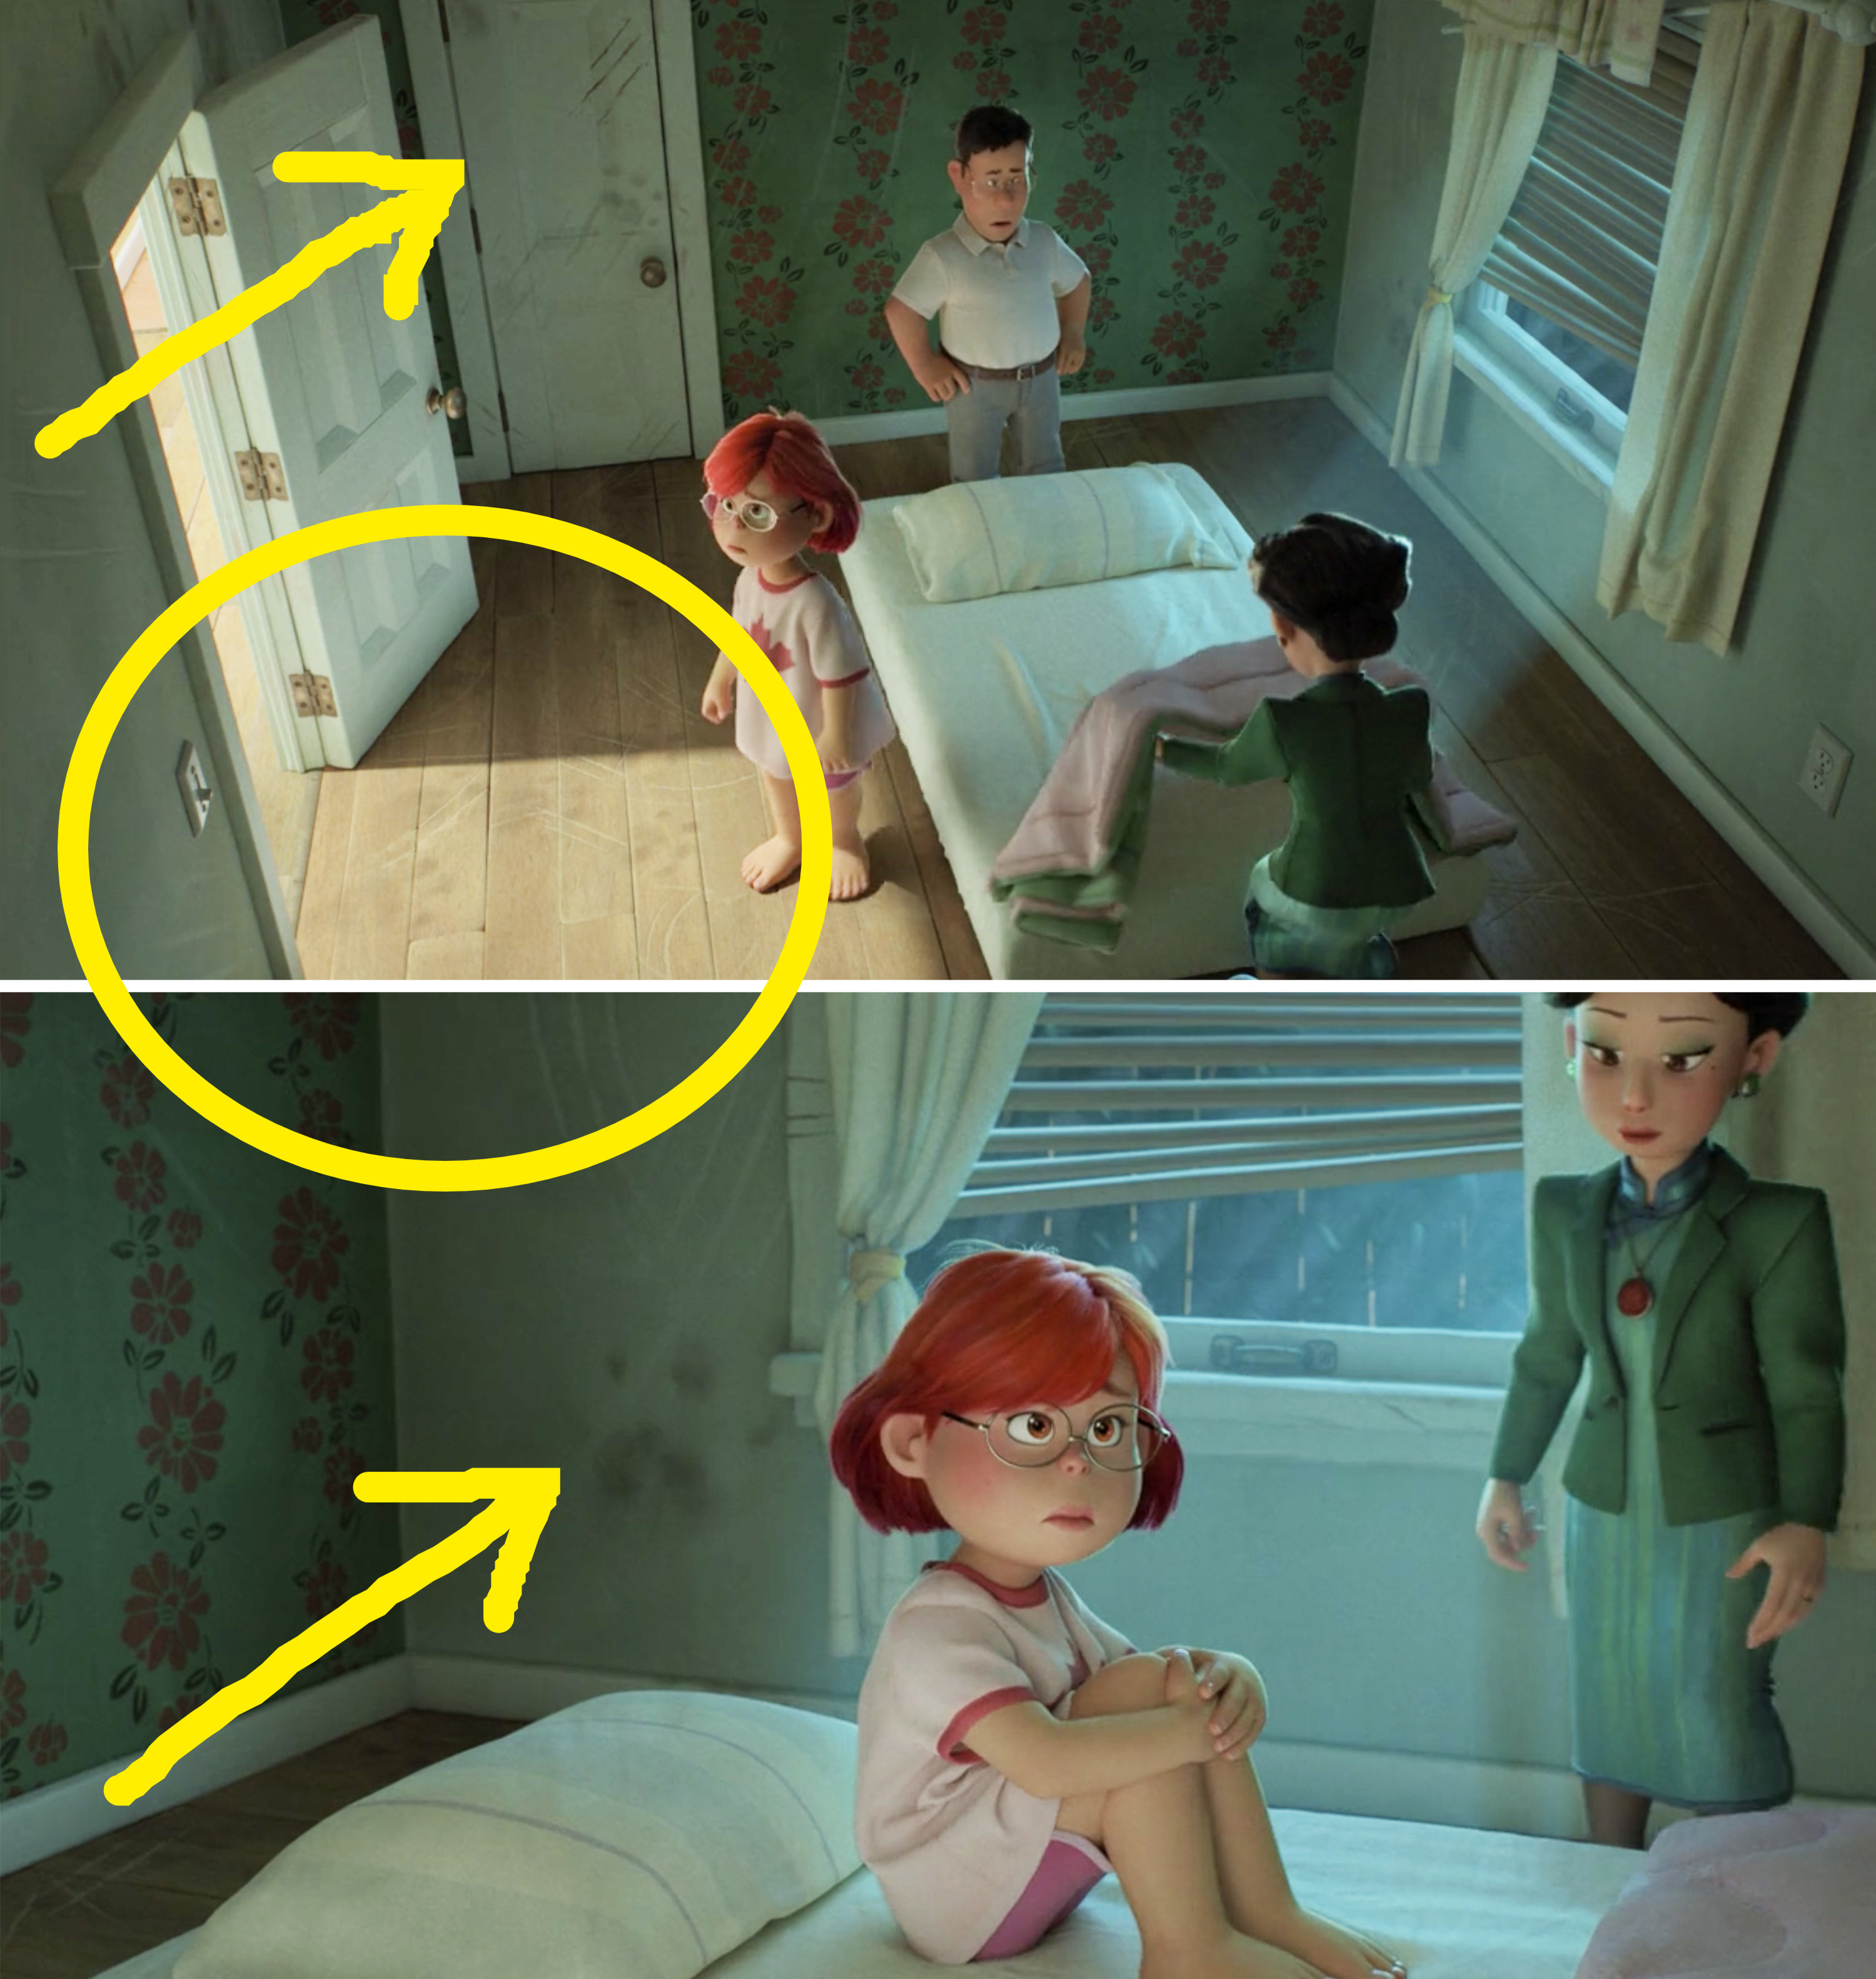 How Anime Inspired Pixar's Turning Red